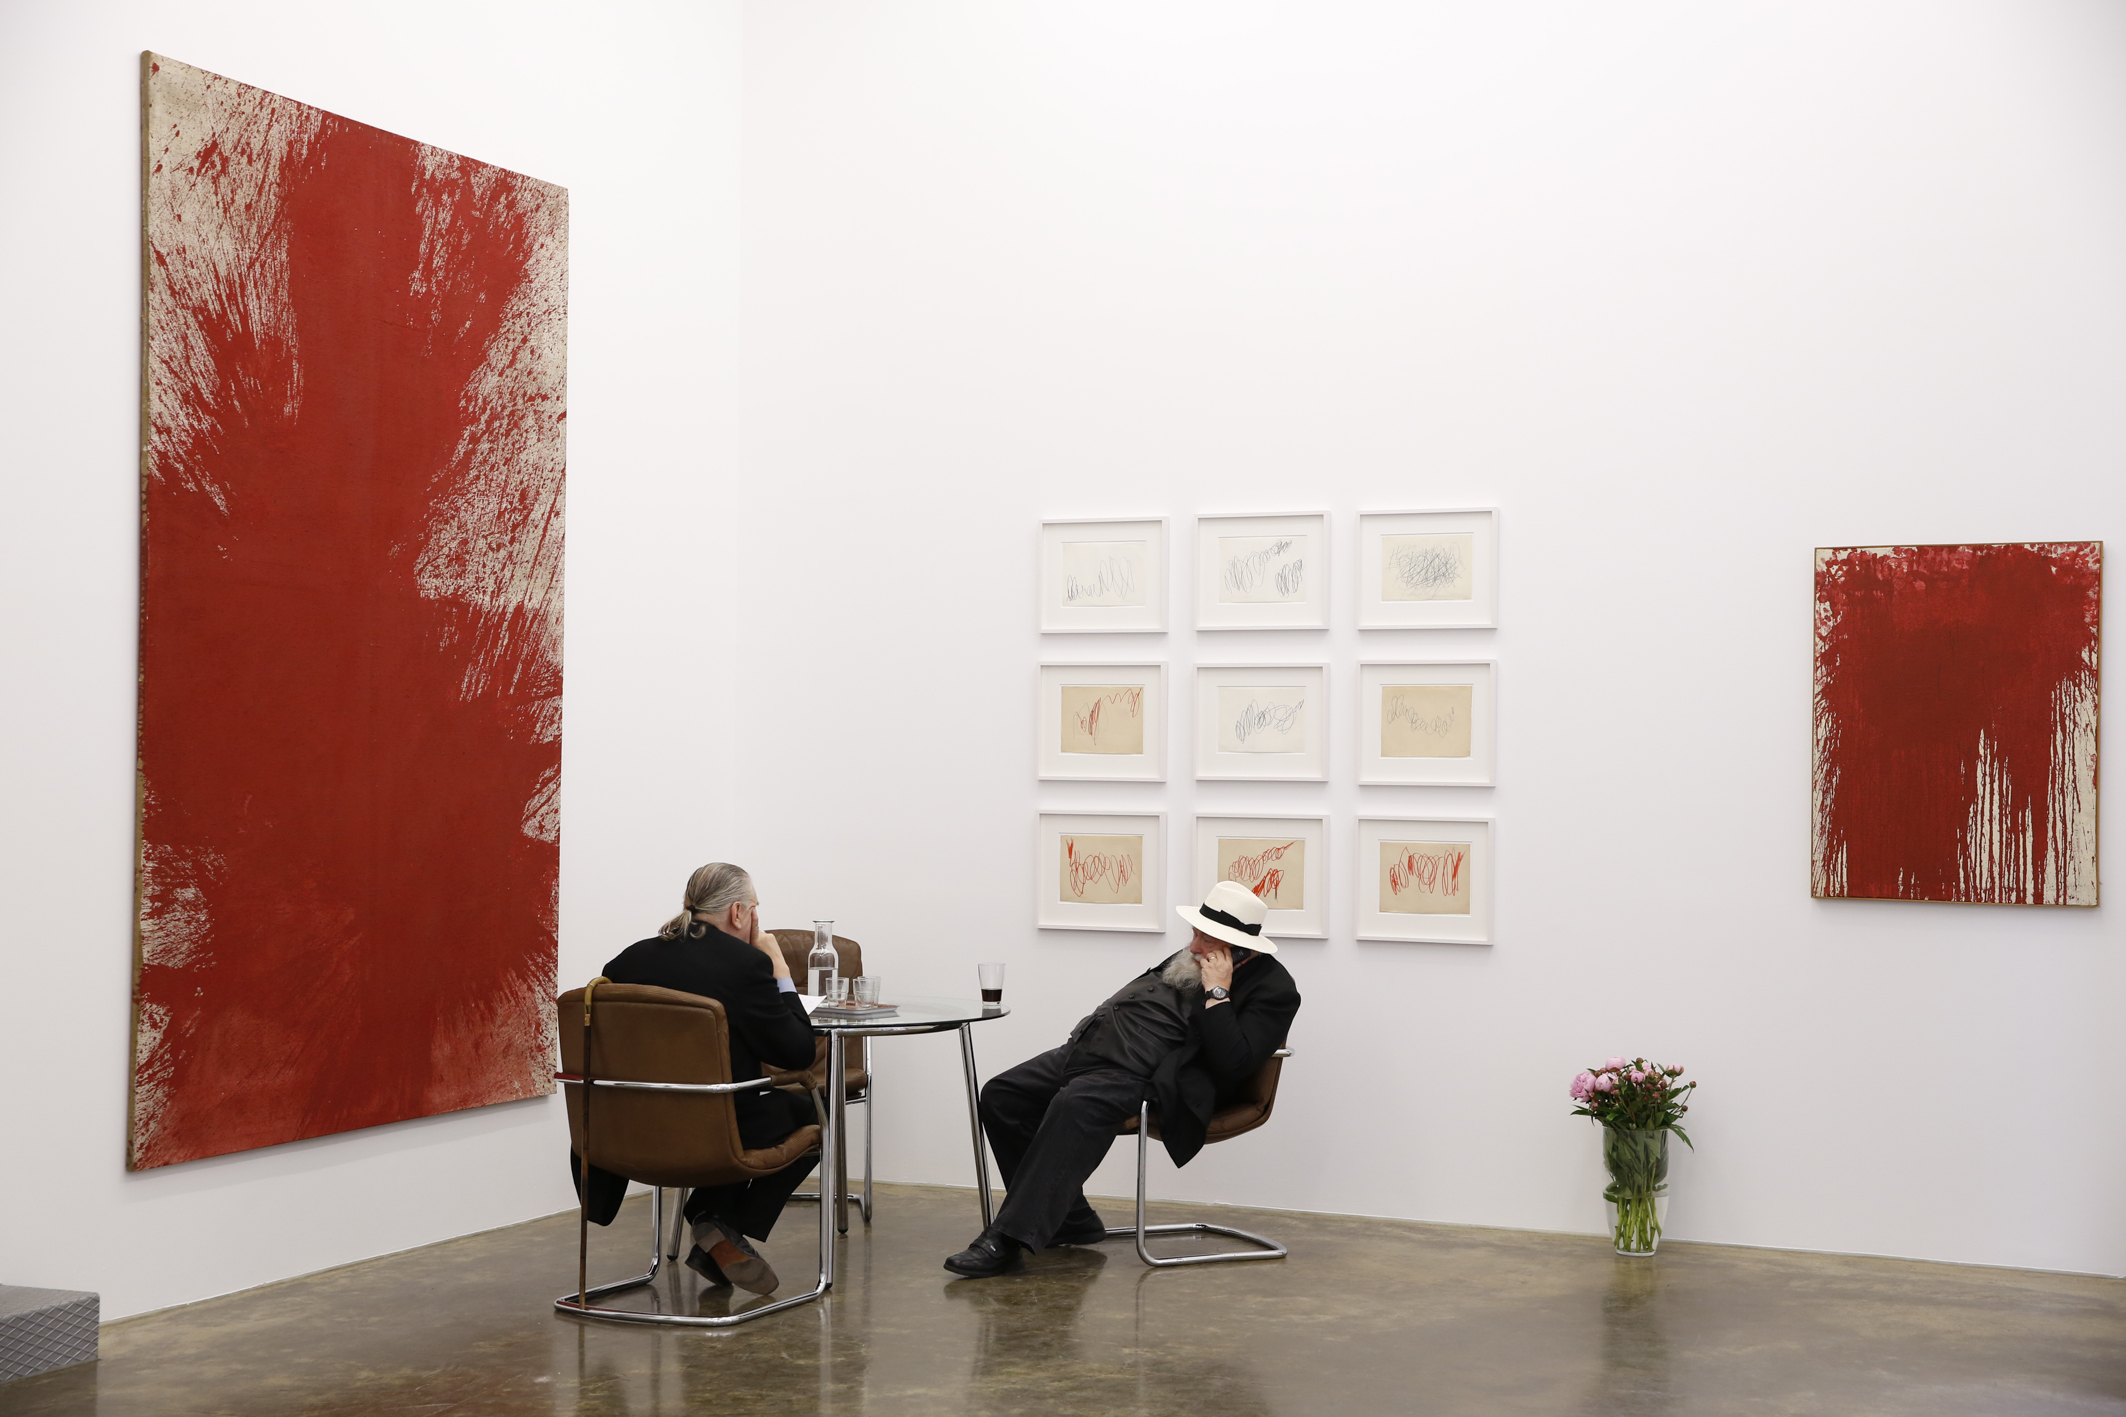 Two men sitting at a table with large paintings on the walls that have large red blotches of paint covering most of the canvas, and smaller drawings arranged in a 3 by 3 grid on part of the wall.